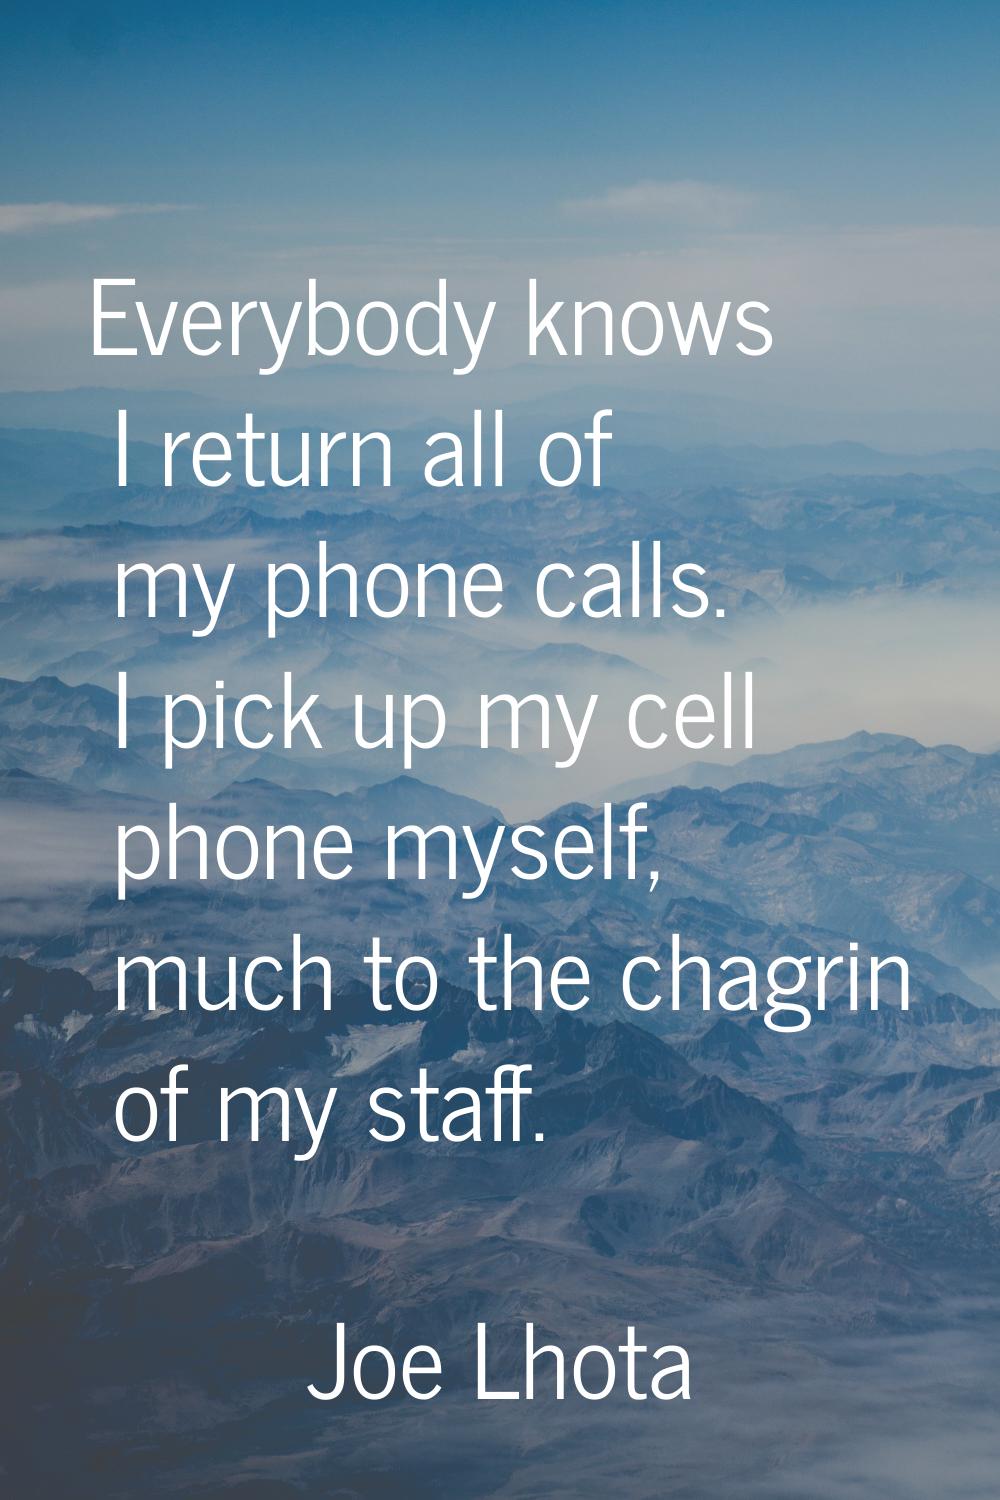 Everybody knows I return all of my phone calls. I pick up my cell phone myself, much to the chagrin